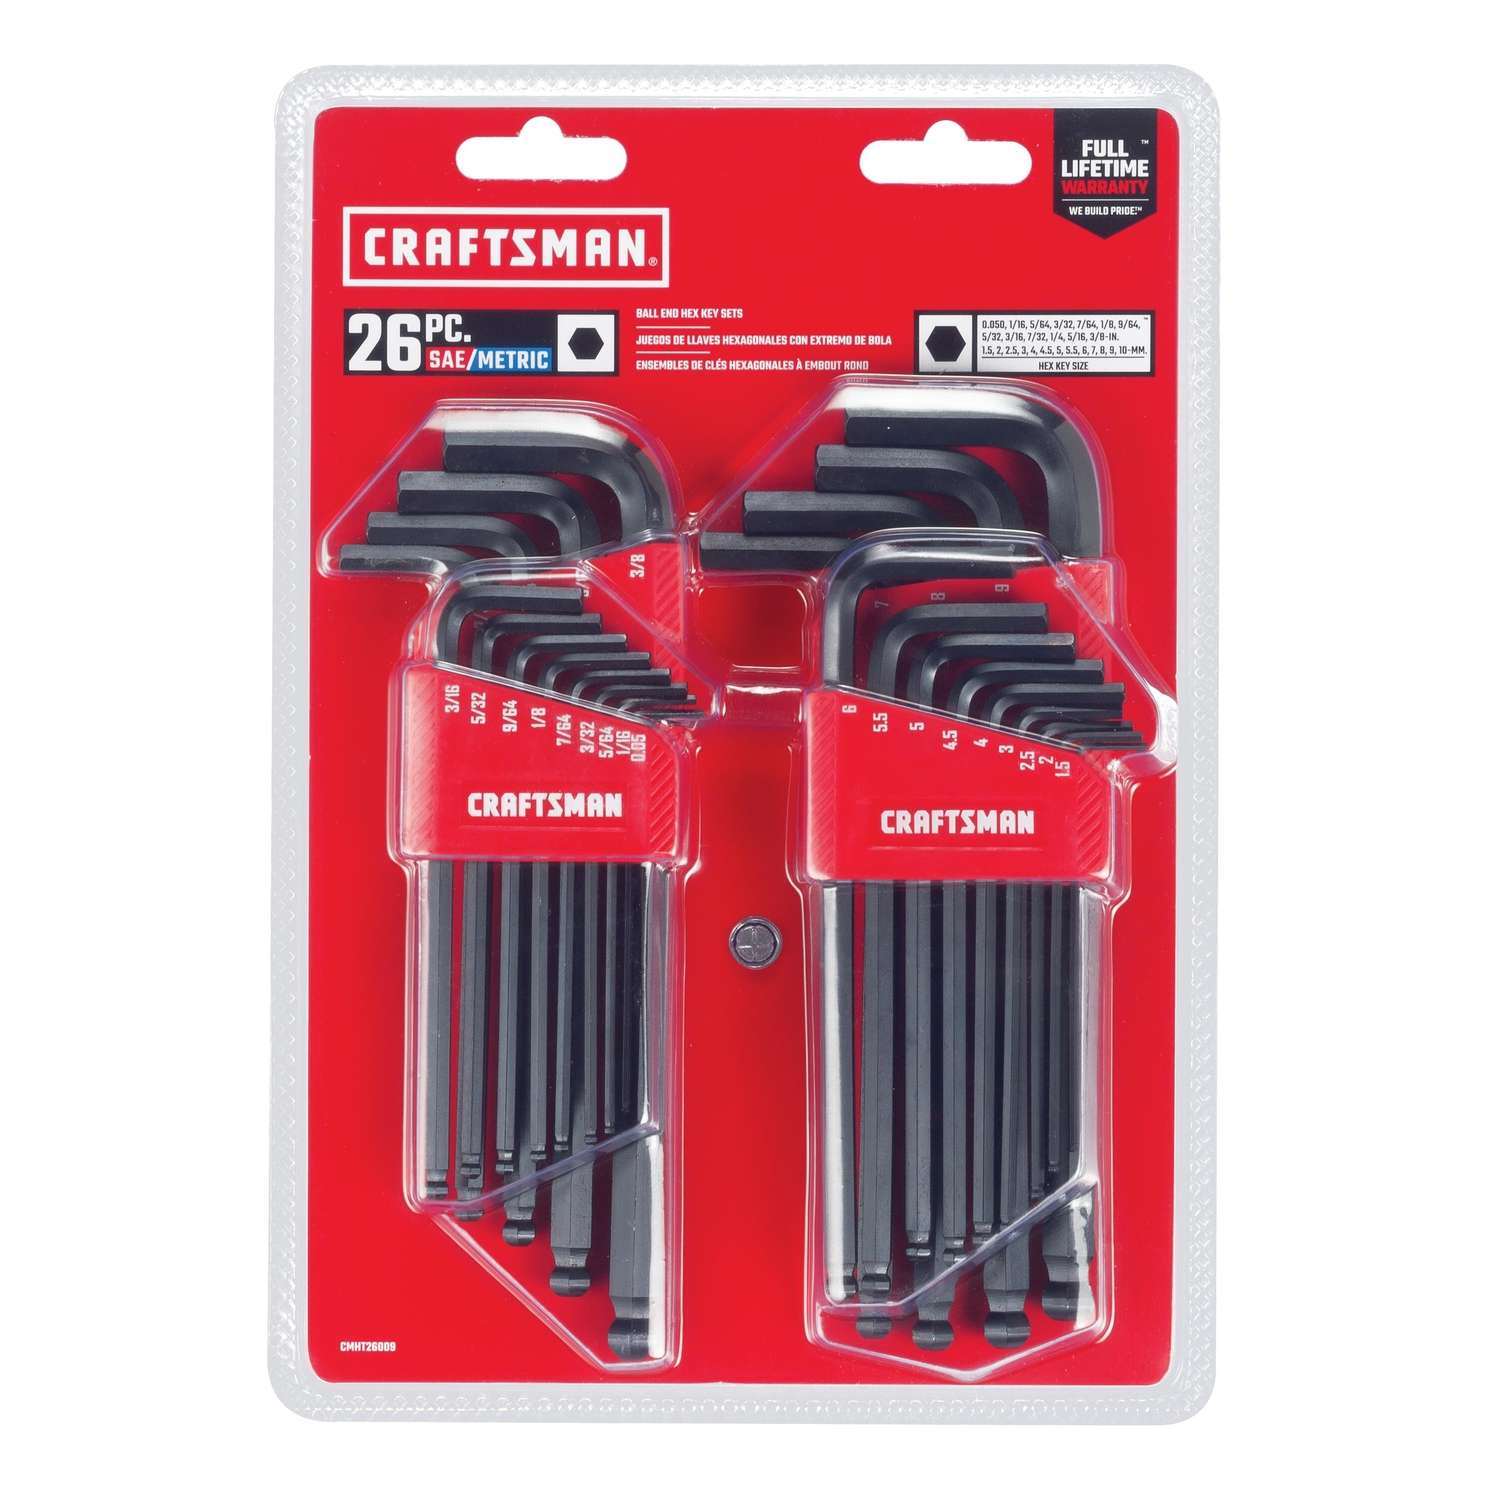 Dicfeos Hex Key Allen Wrench Set SAE Metric Long Arm Ball End Hex